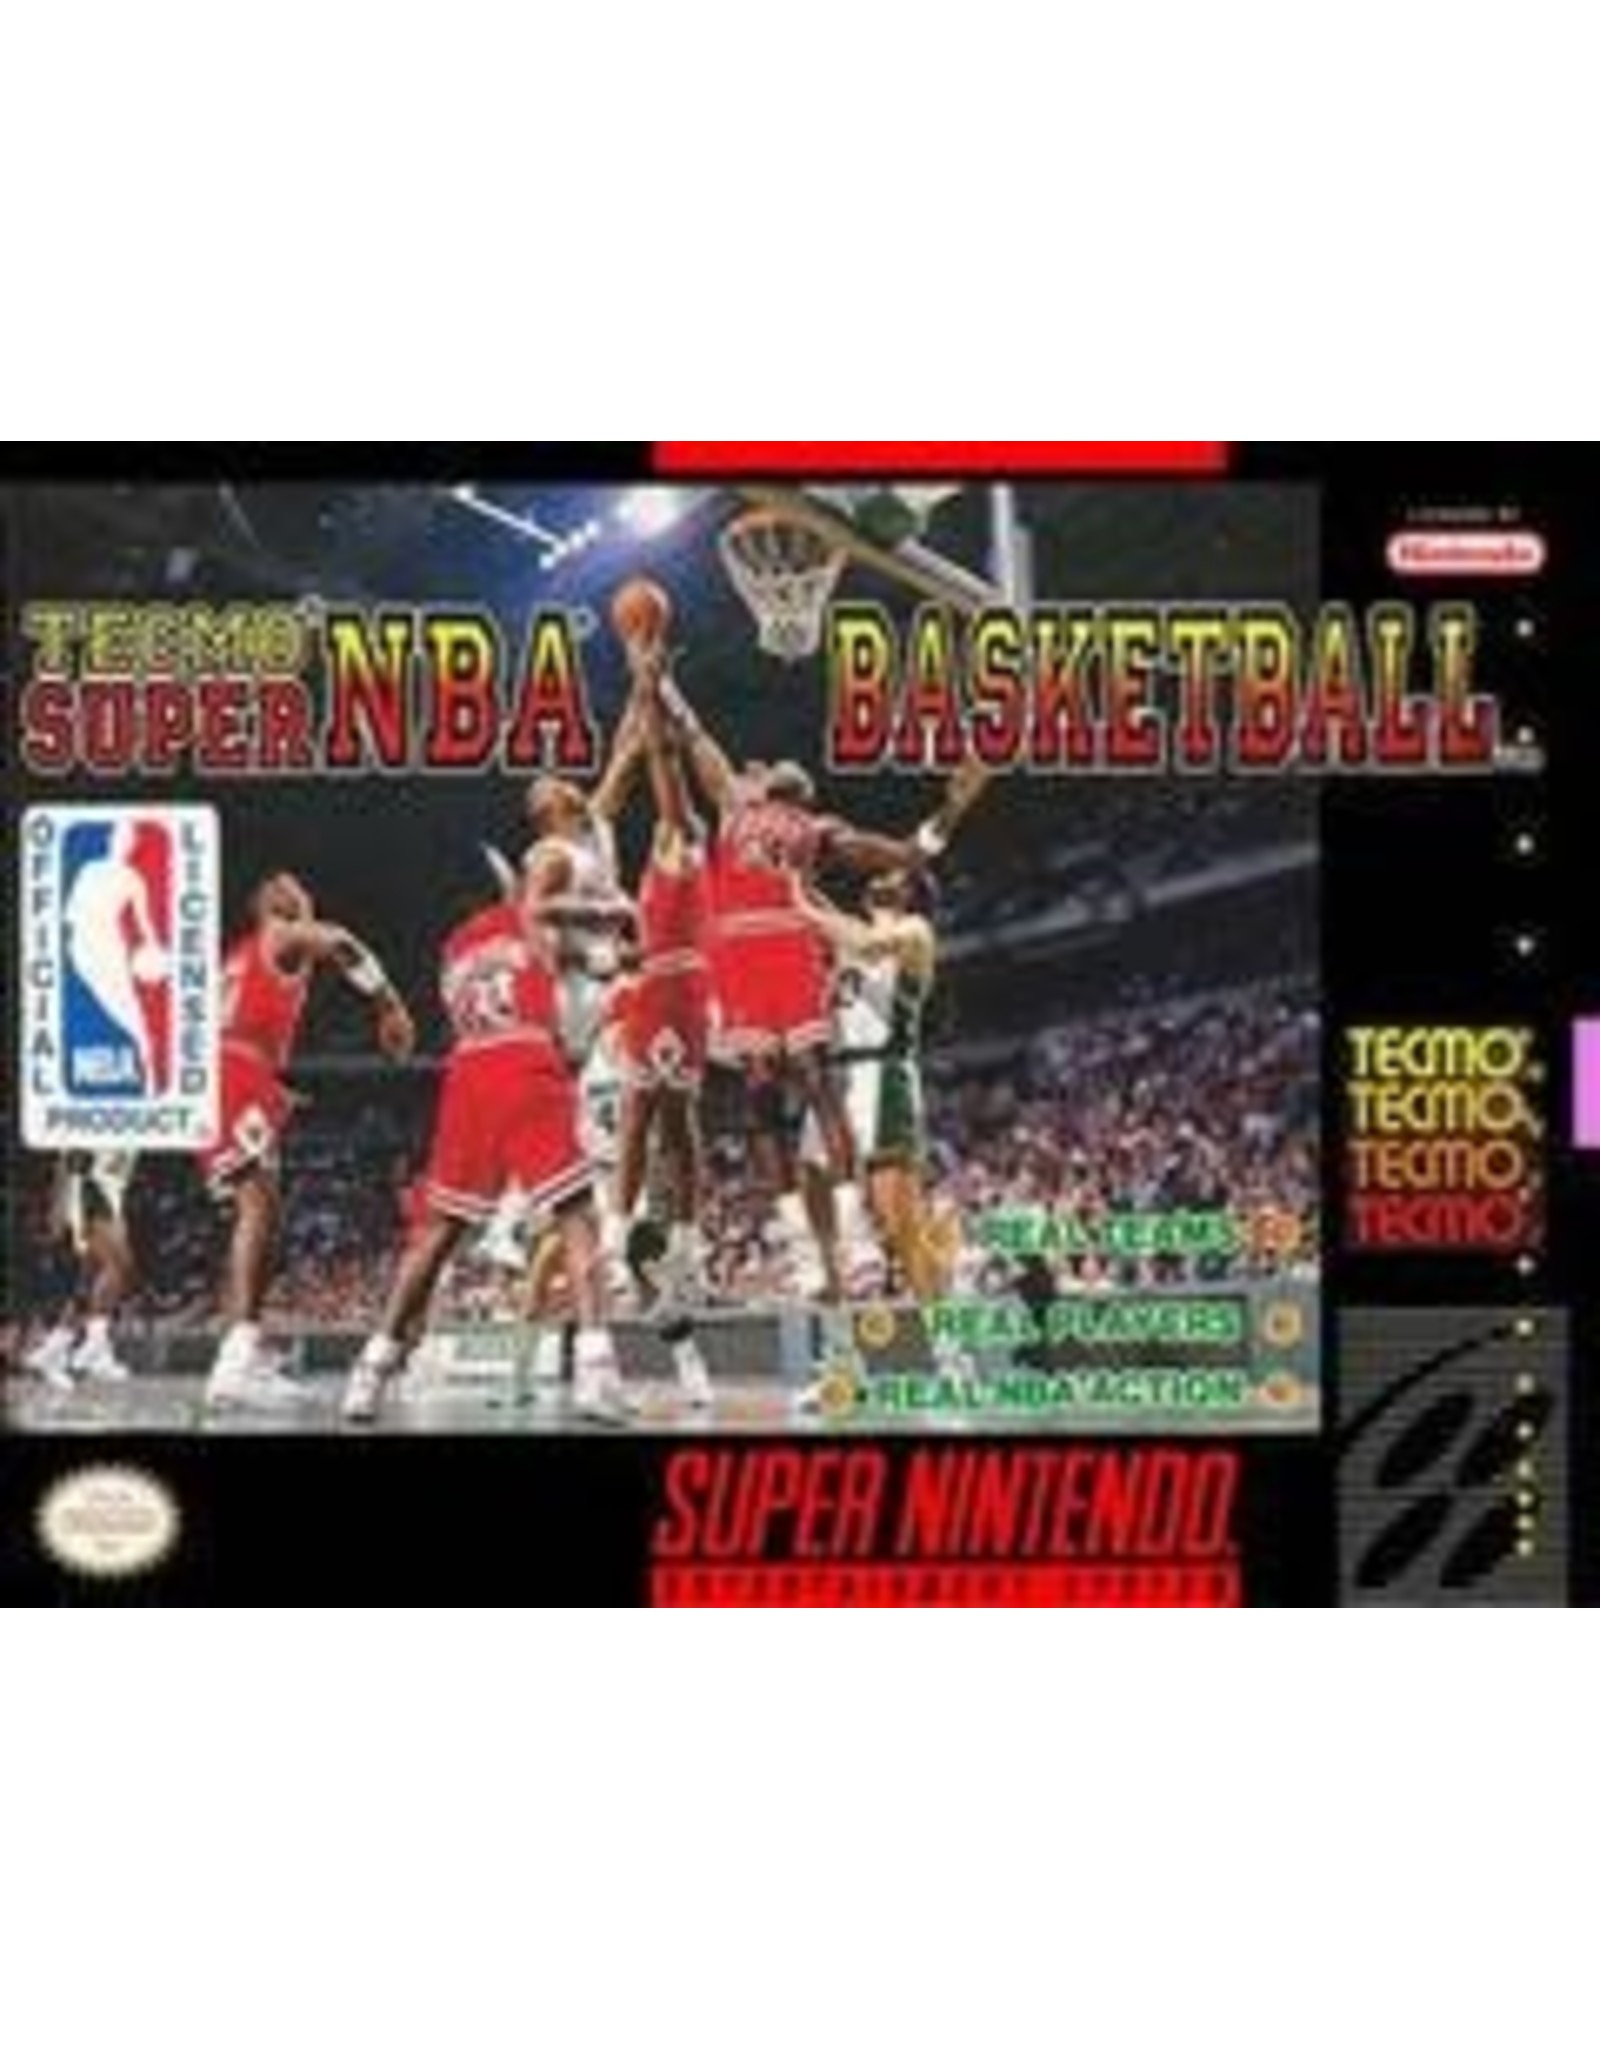 Super Nintendo Tecmo Super NBA Basketball (Used, Cart Only, Cosmetic Damage)